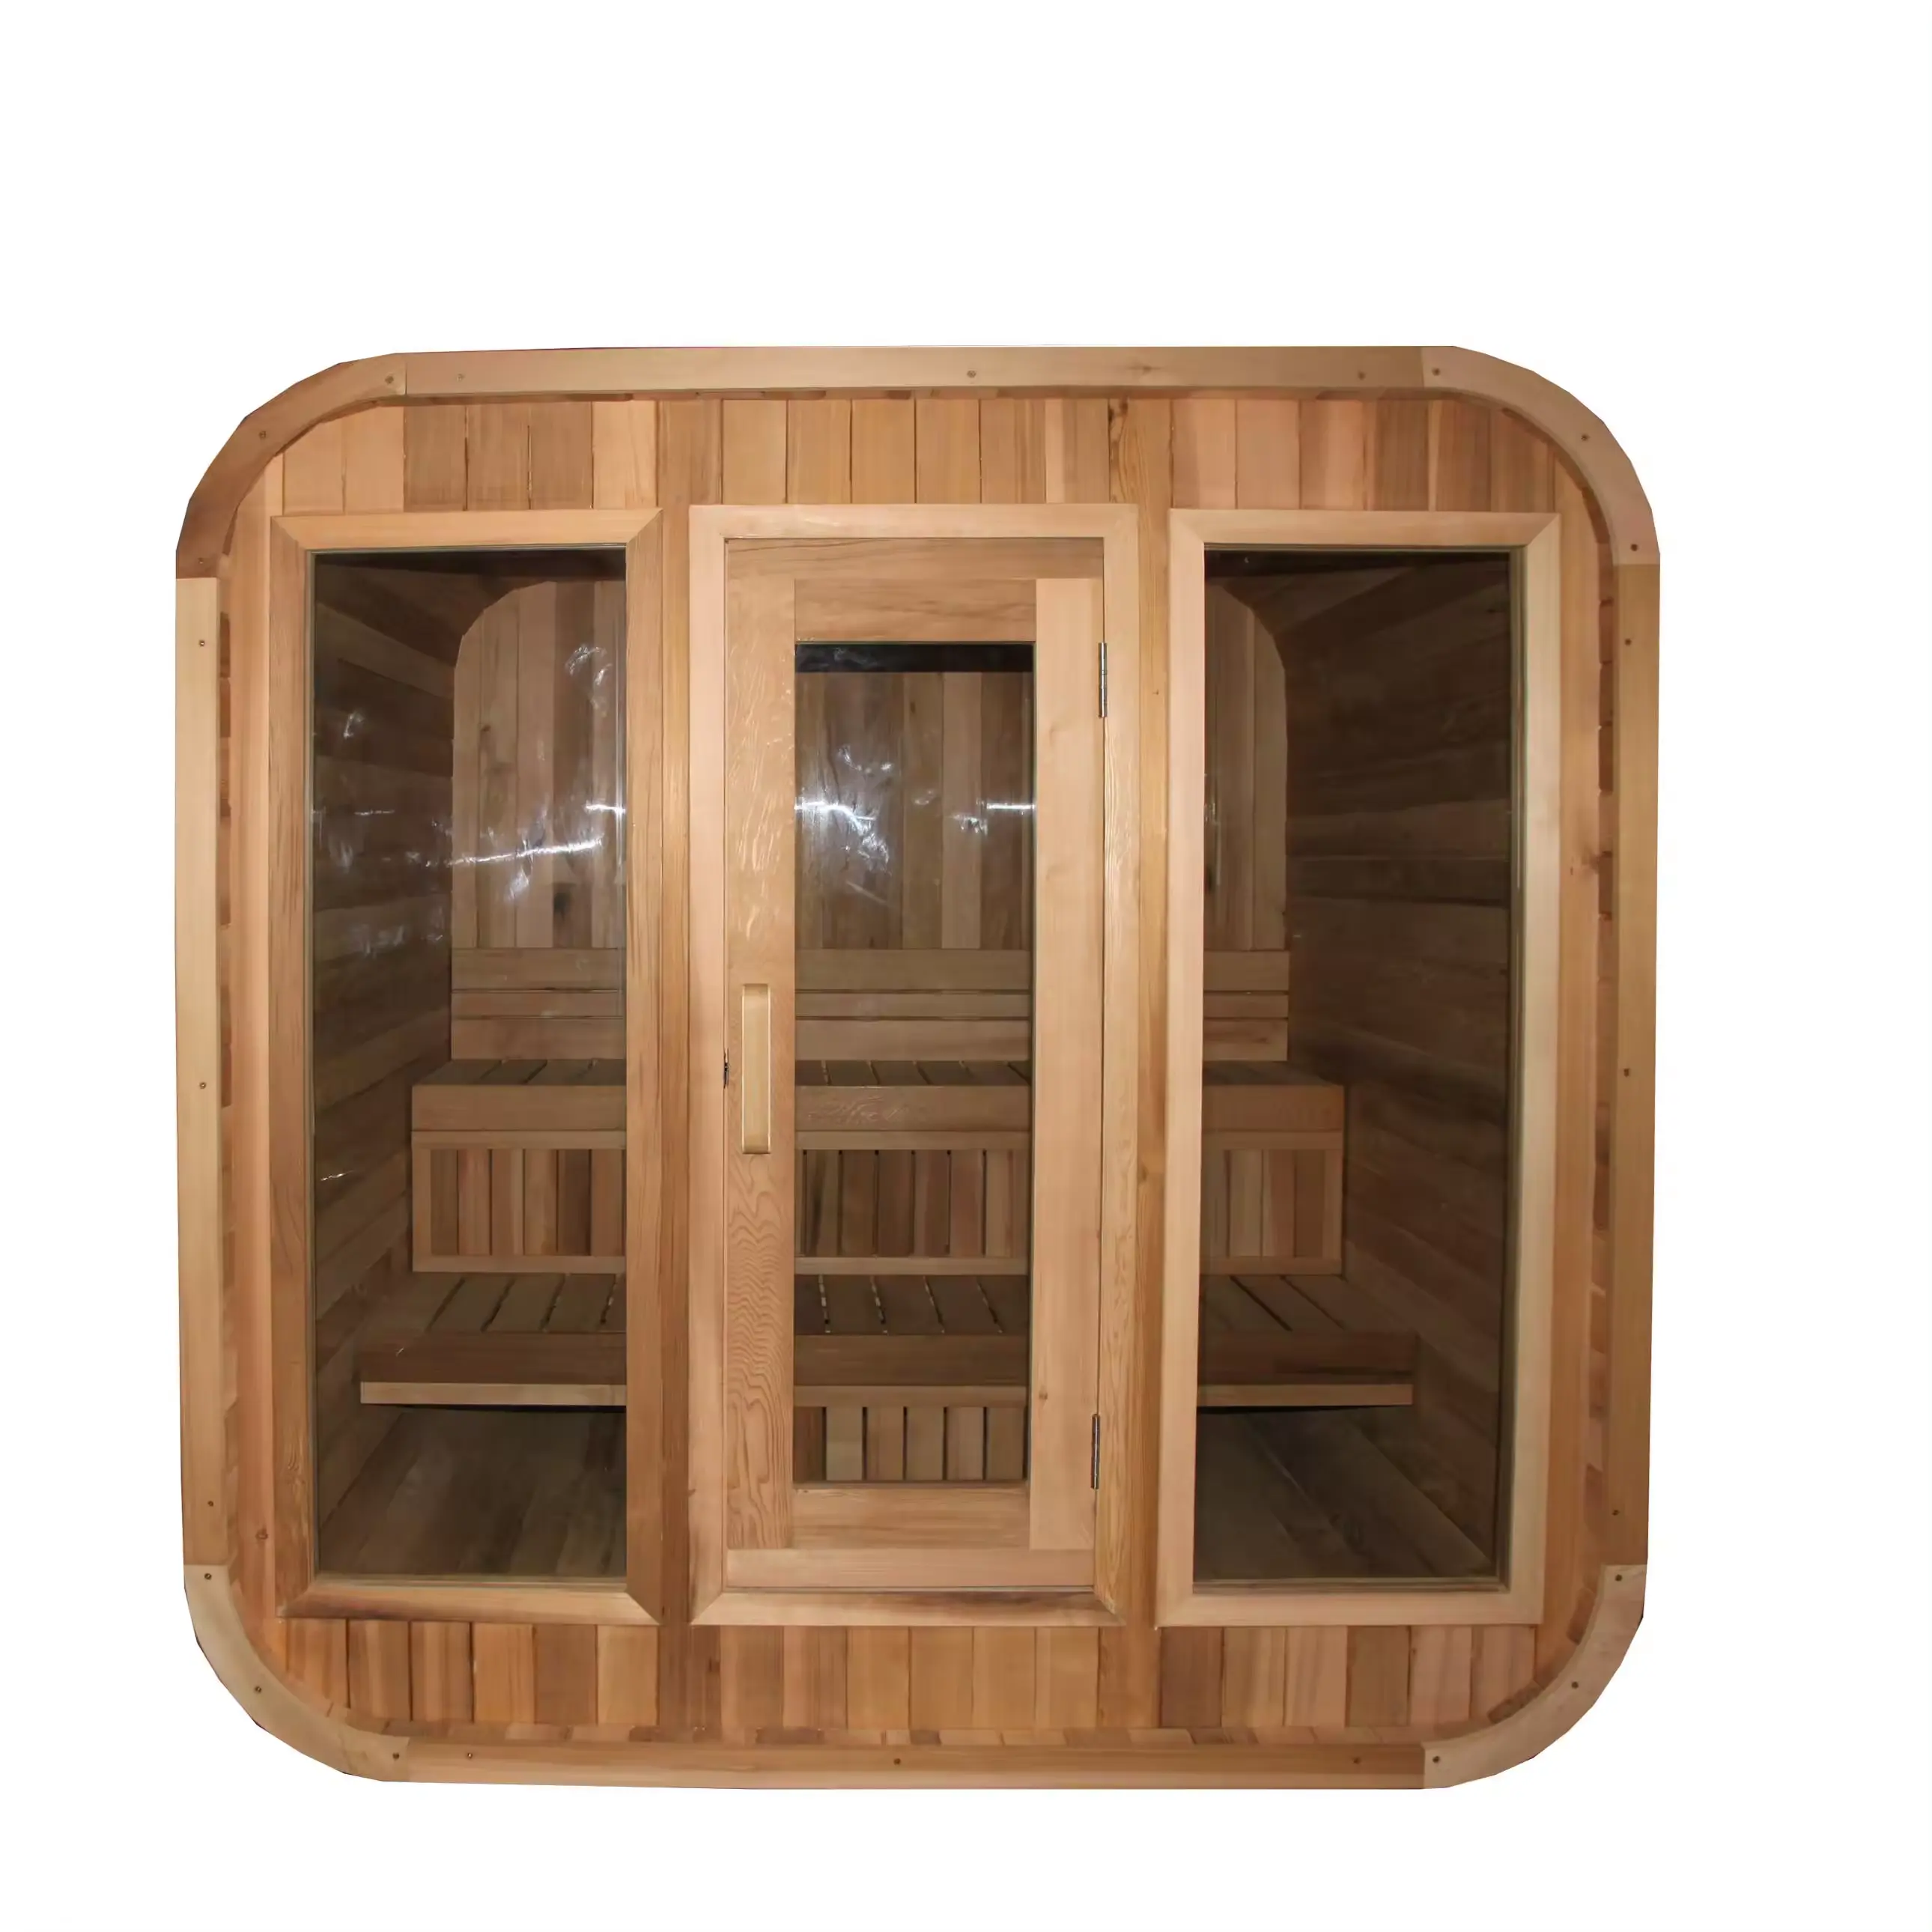 Caisheng Hot Sales 6 People Canada Red Cedar Material Square Wooden Cube Outdoor Sauna Room With Stove